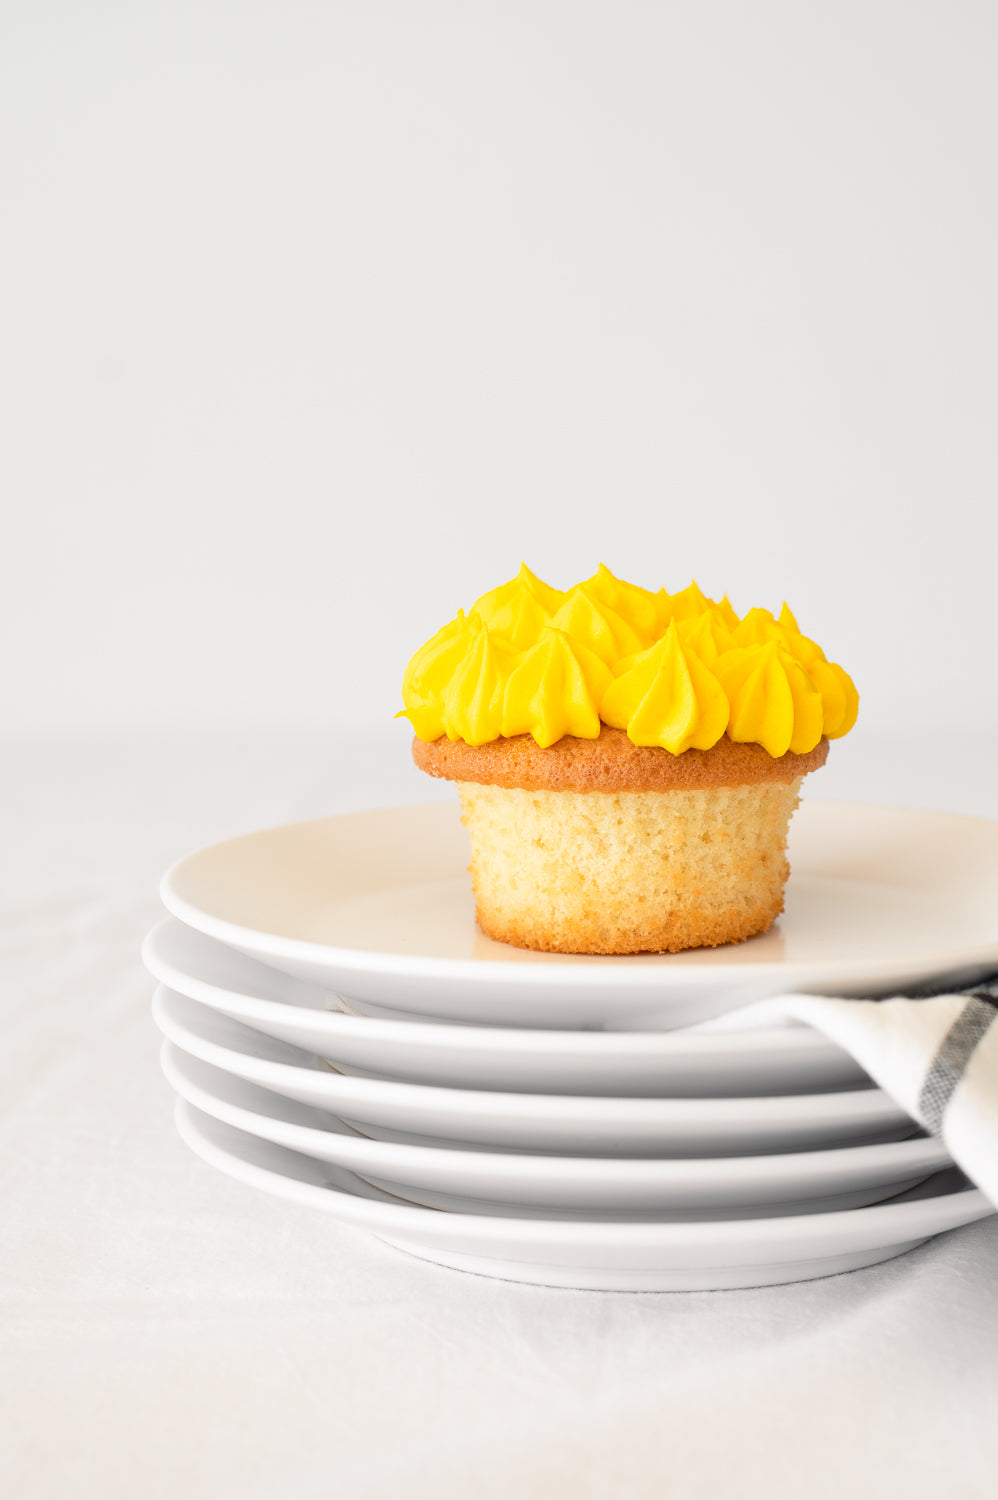 A stack of plates holding a vanilla cupcake with yellow piped icing